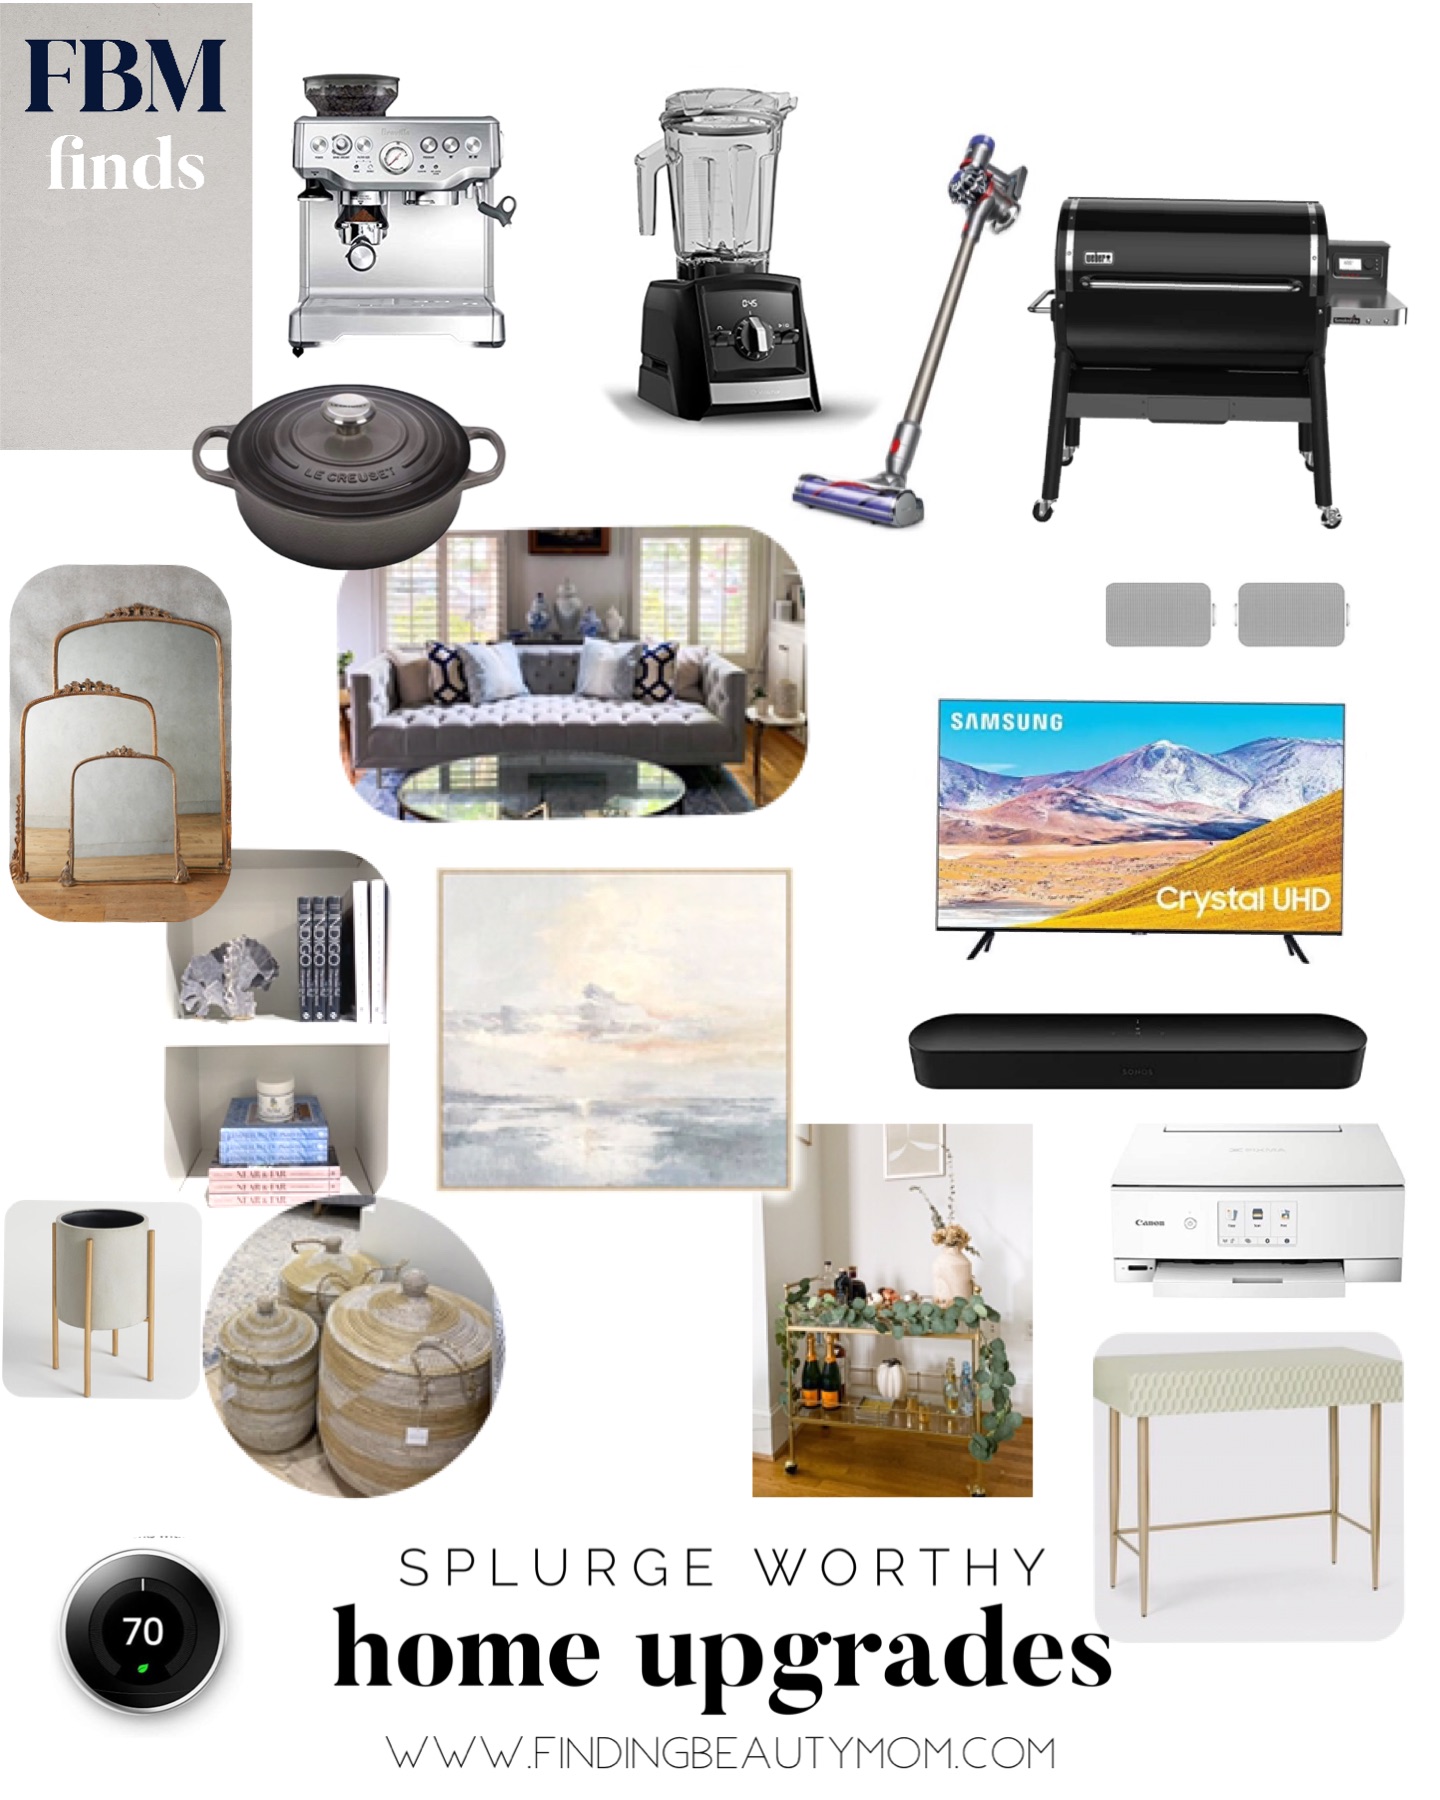 Home upgrades worth the price, Splurge worthy home upgrades. Modern home features you need in 2021, best home gifts, holiday guide, finding beauty mom gift guides